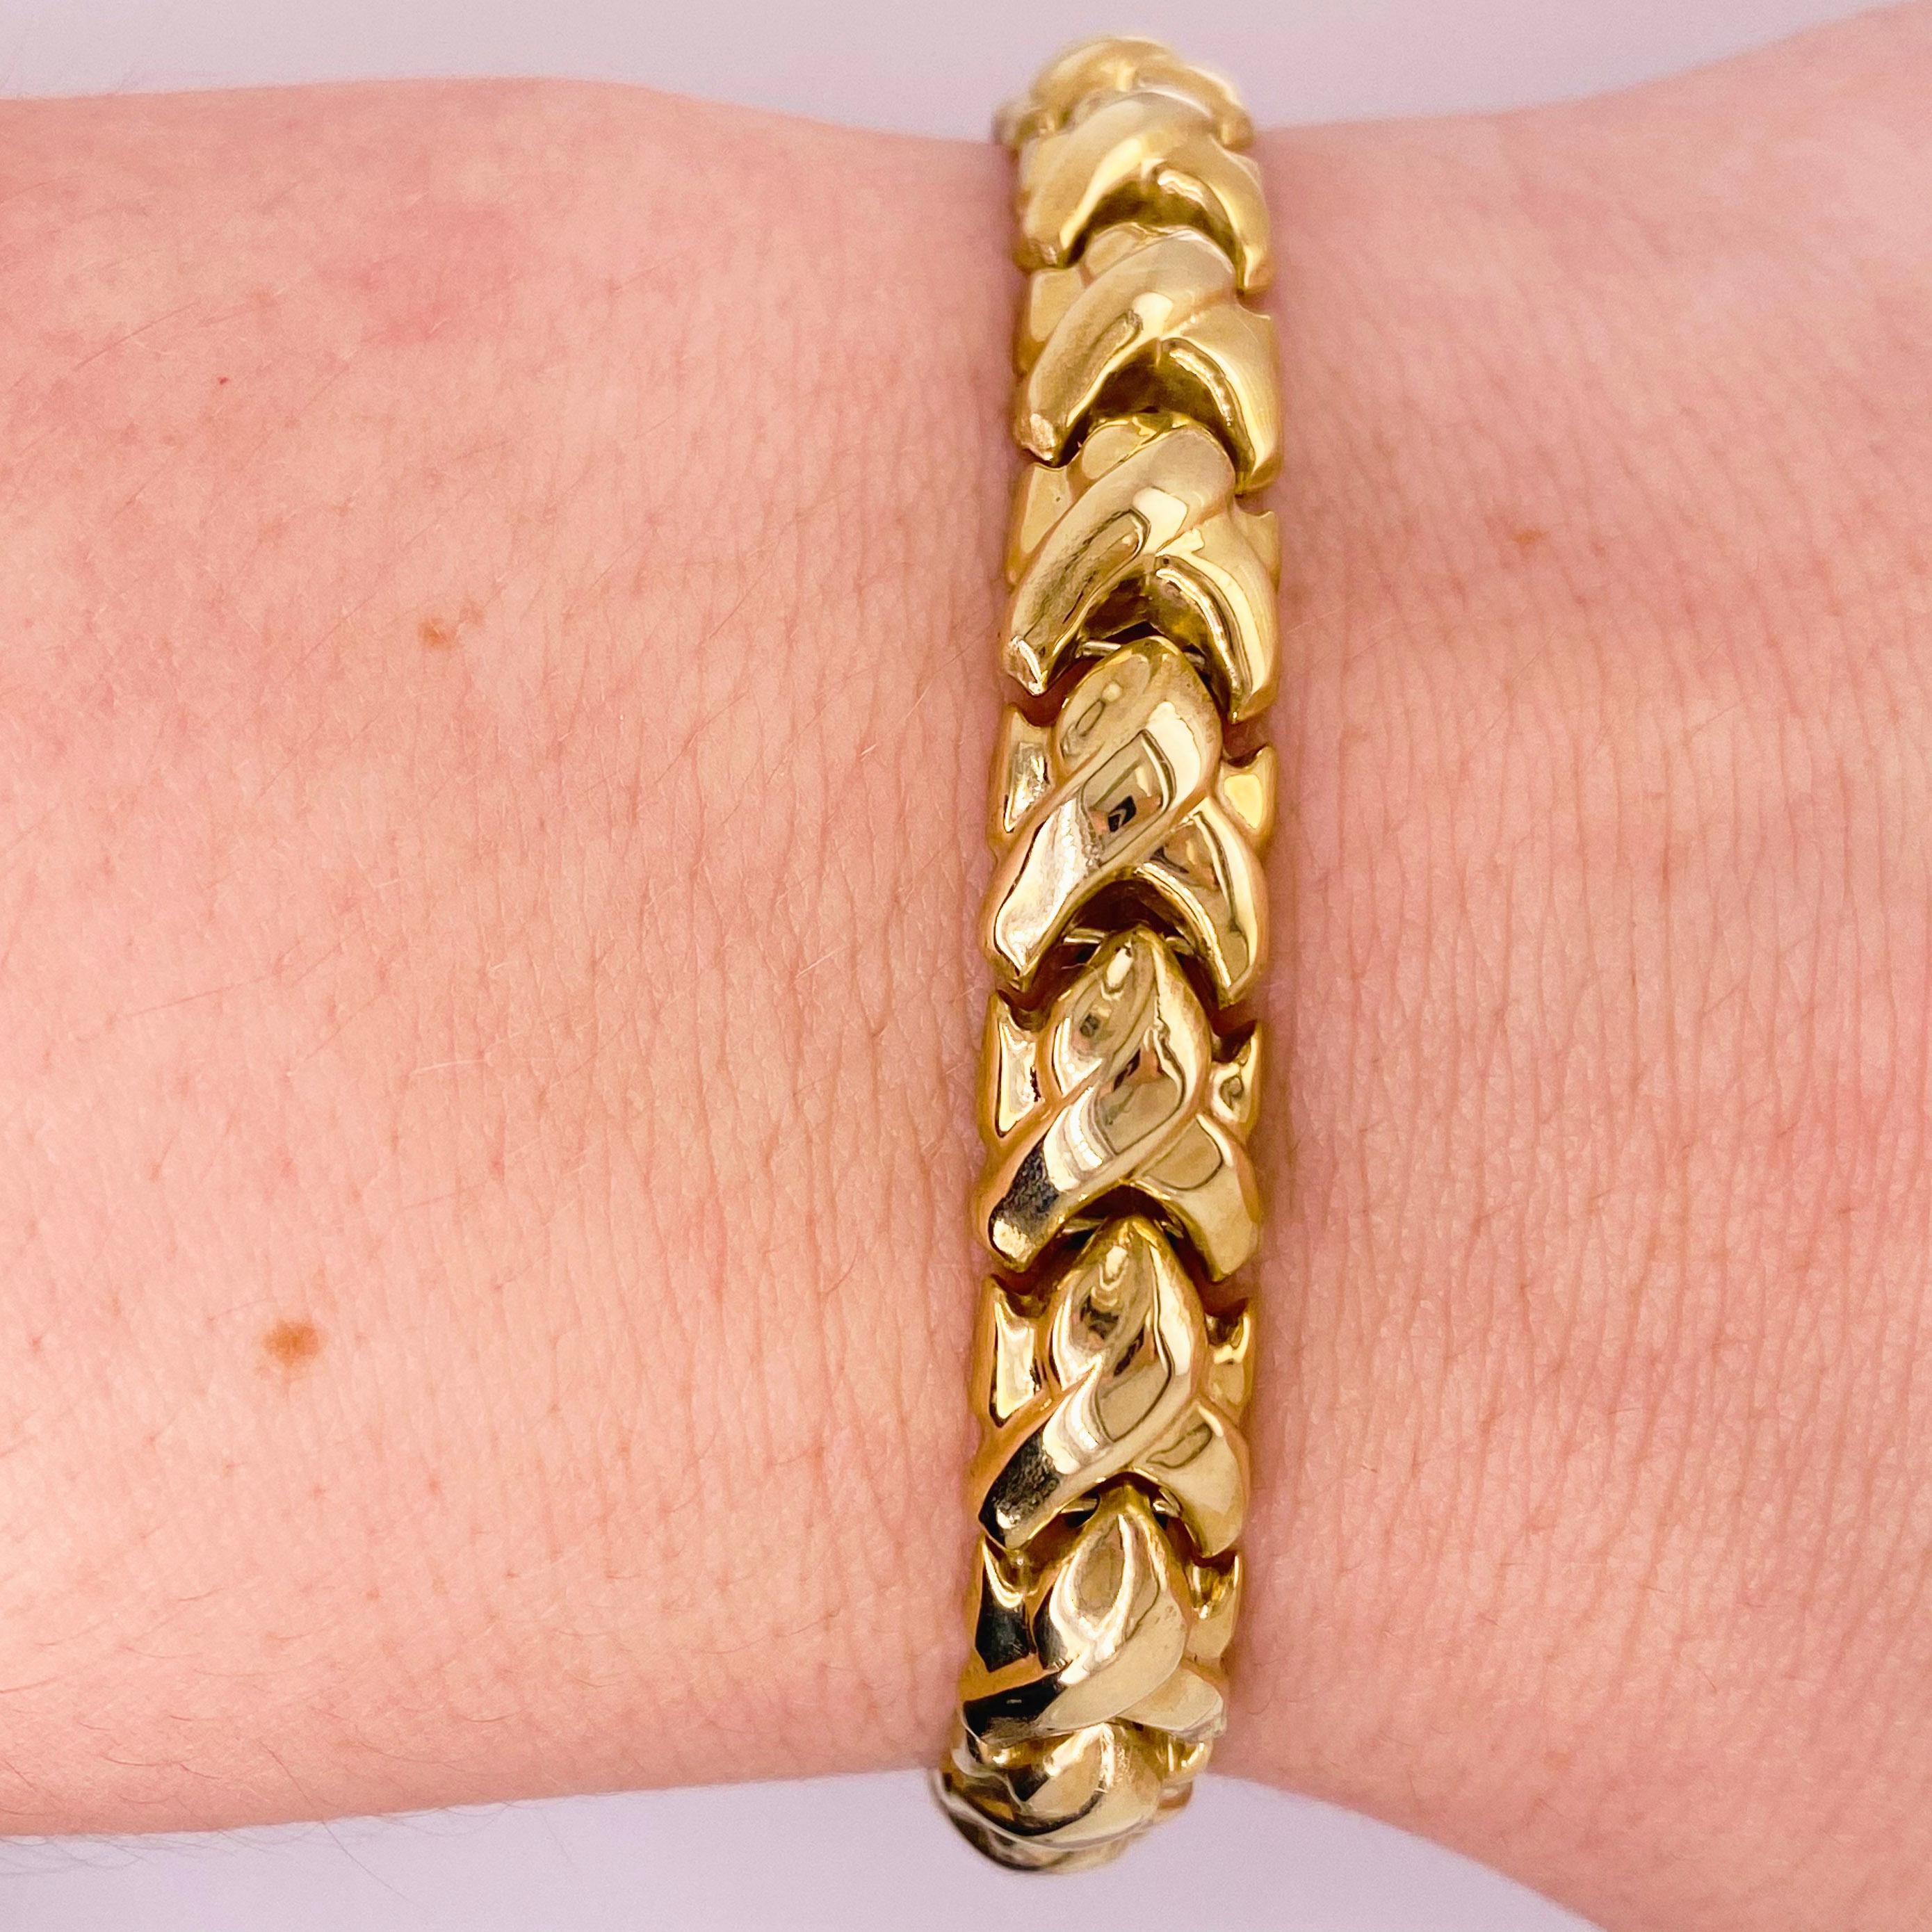 This is a 10 karat yellow gold handmade fancy link bracelet! Each link was handmade and put together to make this gorgeous design. This bracelet would make an excellent gift for your loved one or yourself!
The details for this gorgeous bracelet are